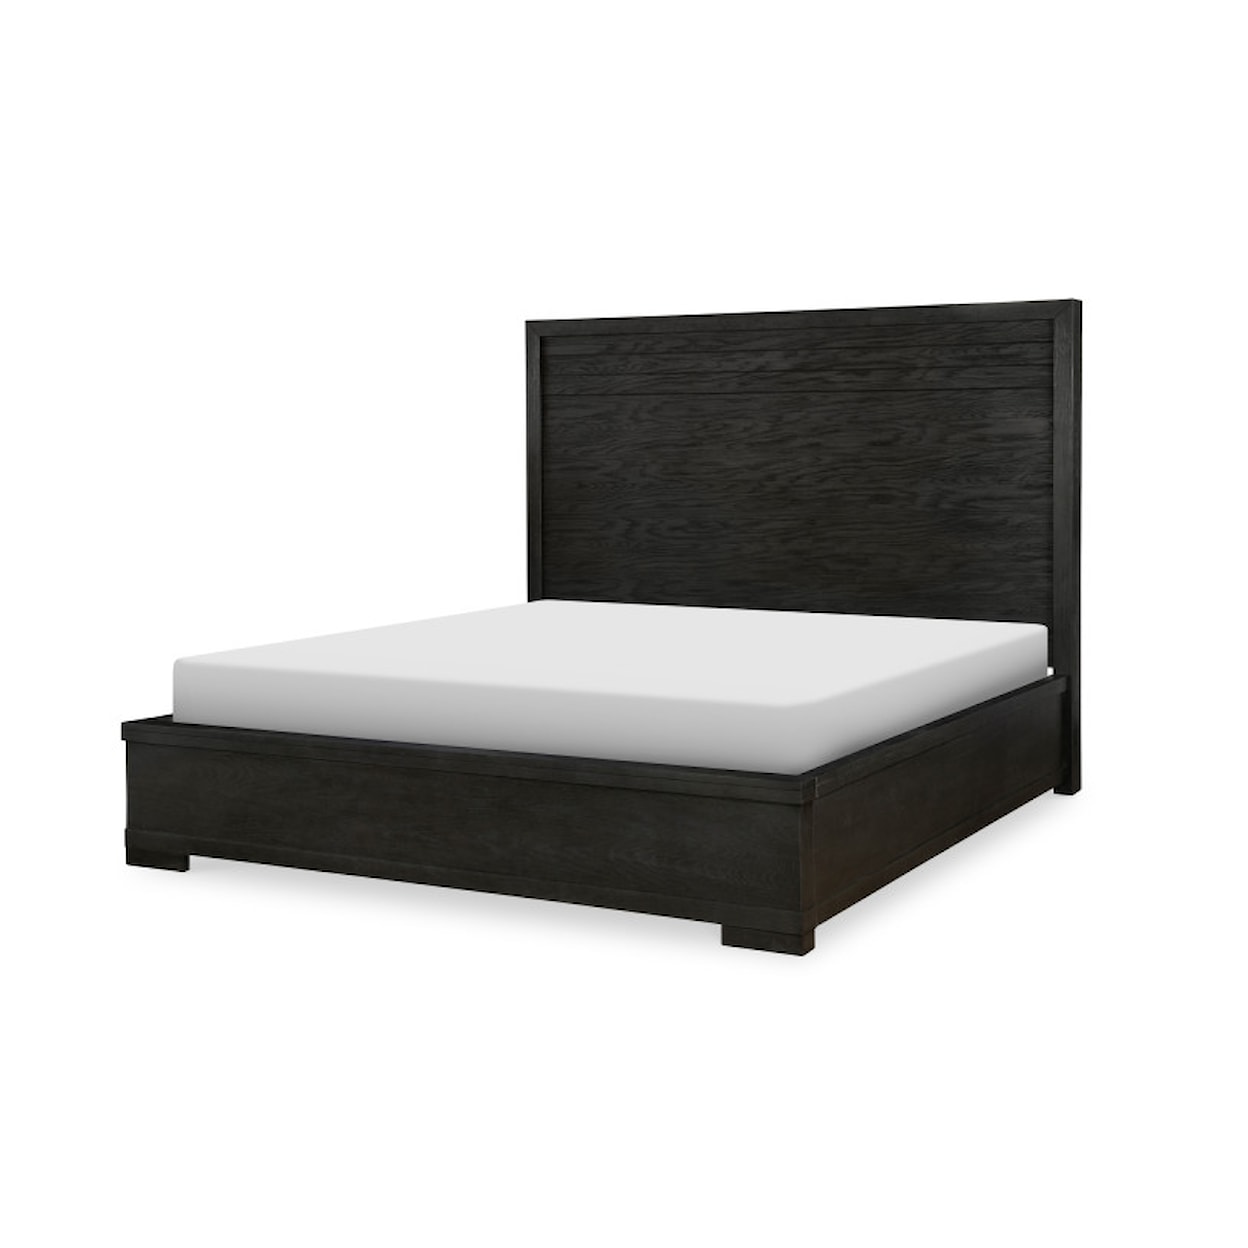 Legacy Classic Westwood Queen Panel Bed